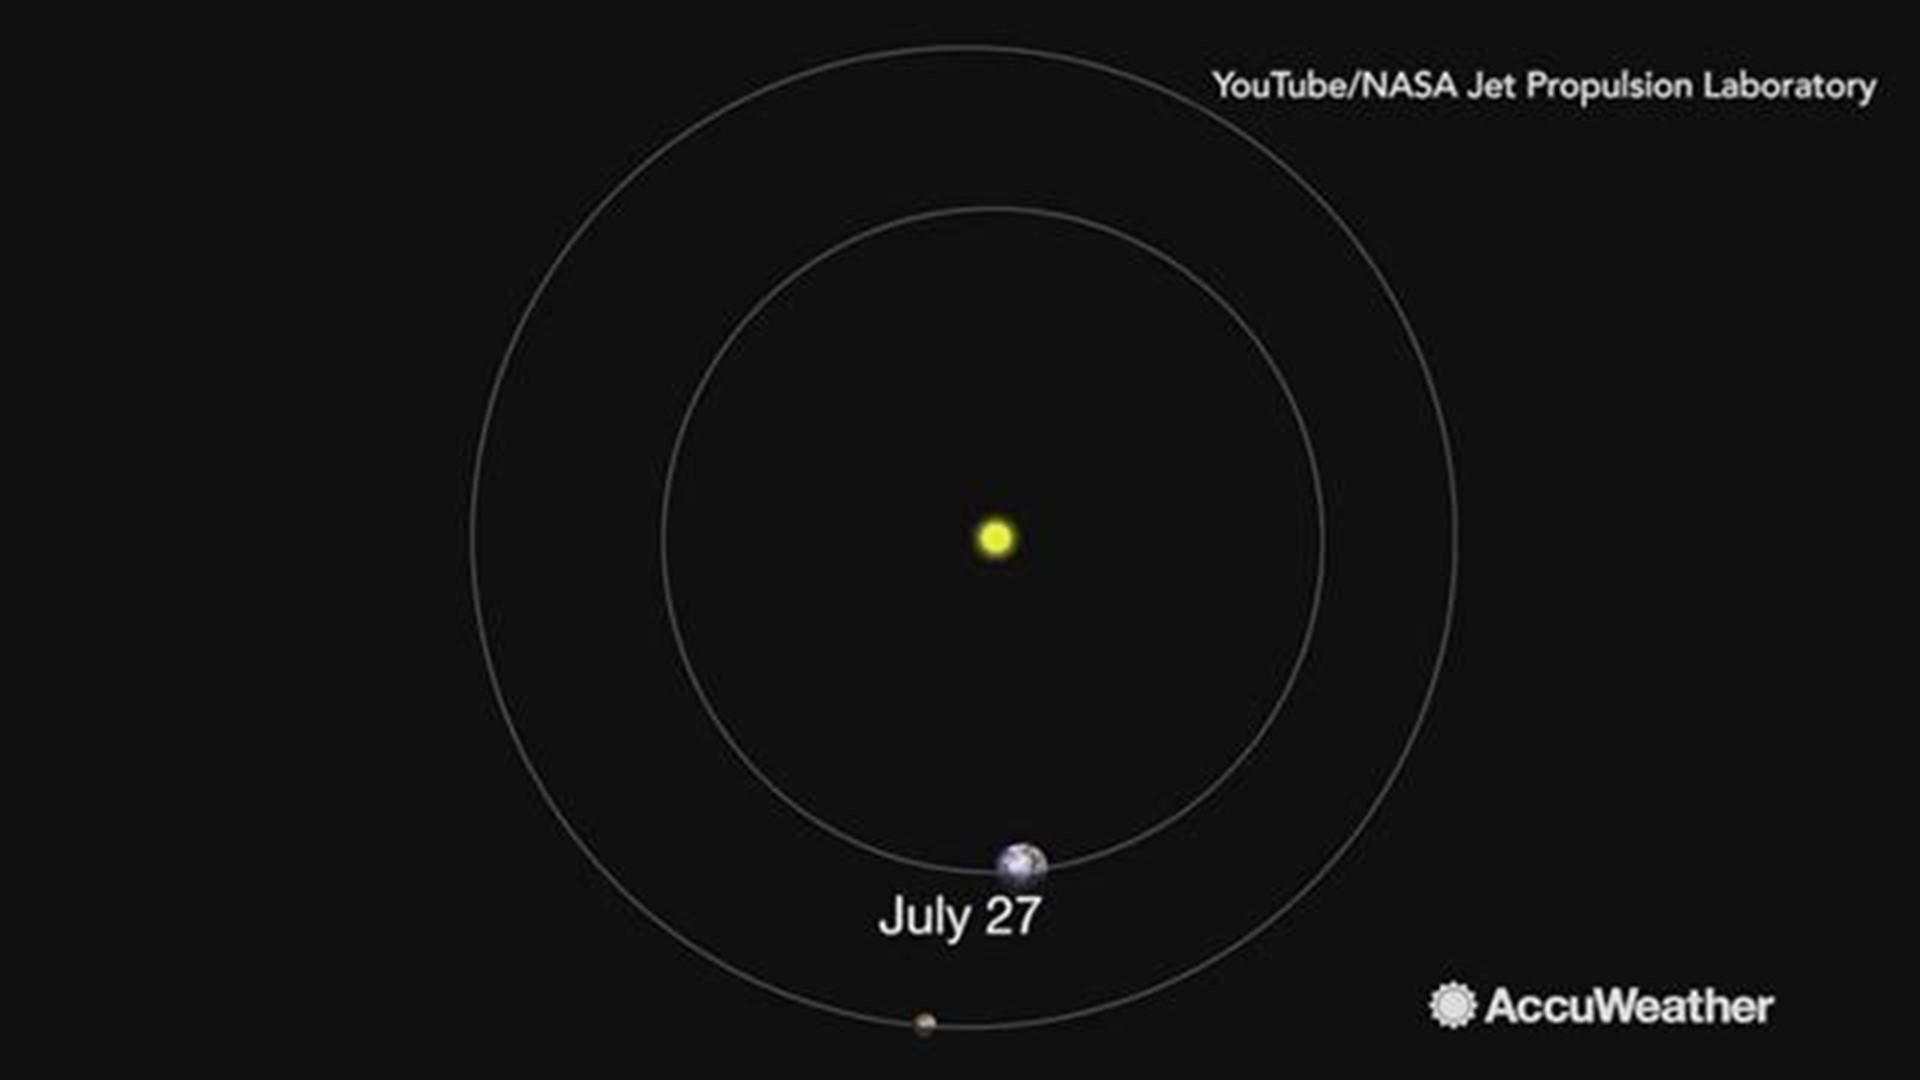 Mark these two days on your calendar.  Mars will reach opposition on July 27.  And on July 31, Mars will be at its closest approach to Earth since 2003.  The Red Planet has been shining bright throughout the month of July at night, you can't miss it.